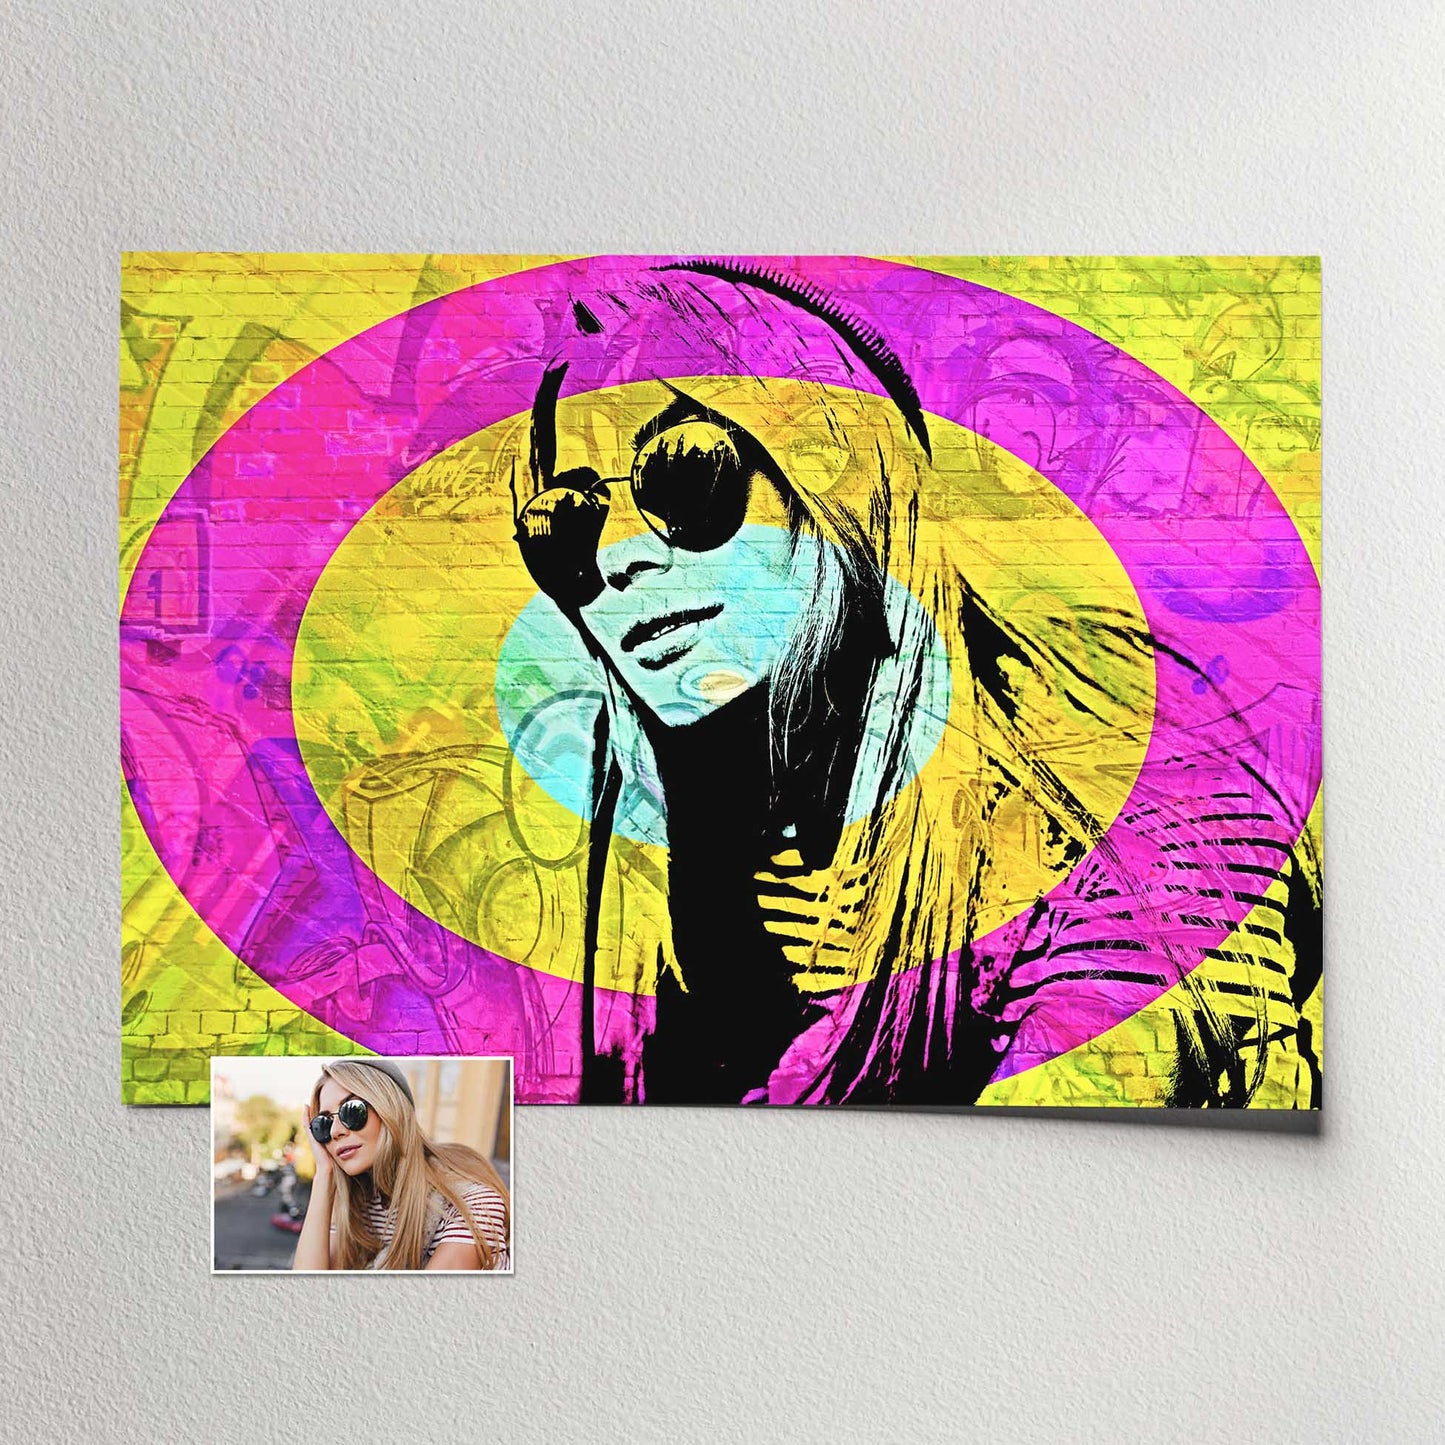 Make a statement with a Personalised Graffiti Street Art Print. The graffiti street art filter and real brick effect bring an authentic and bold touch to your walls. The vibrant yellow, pink, and blue hues create a dynamic and energetic home decor